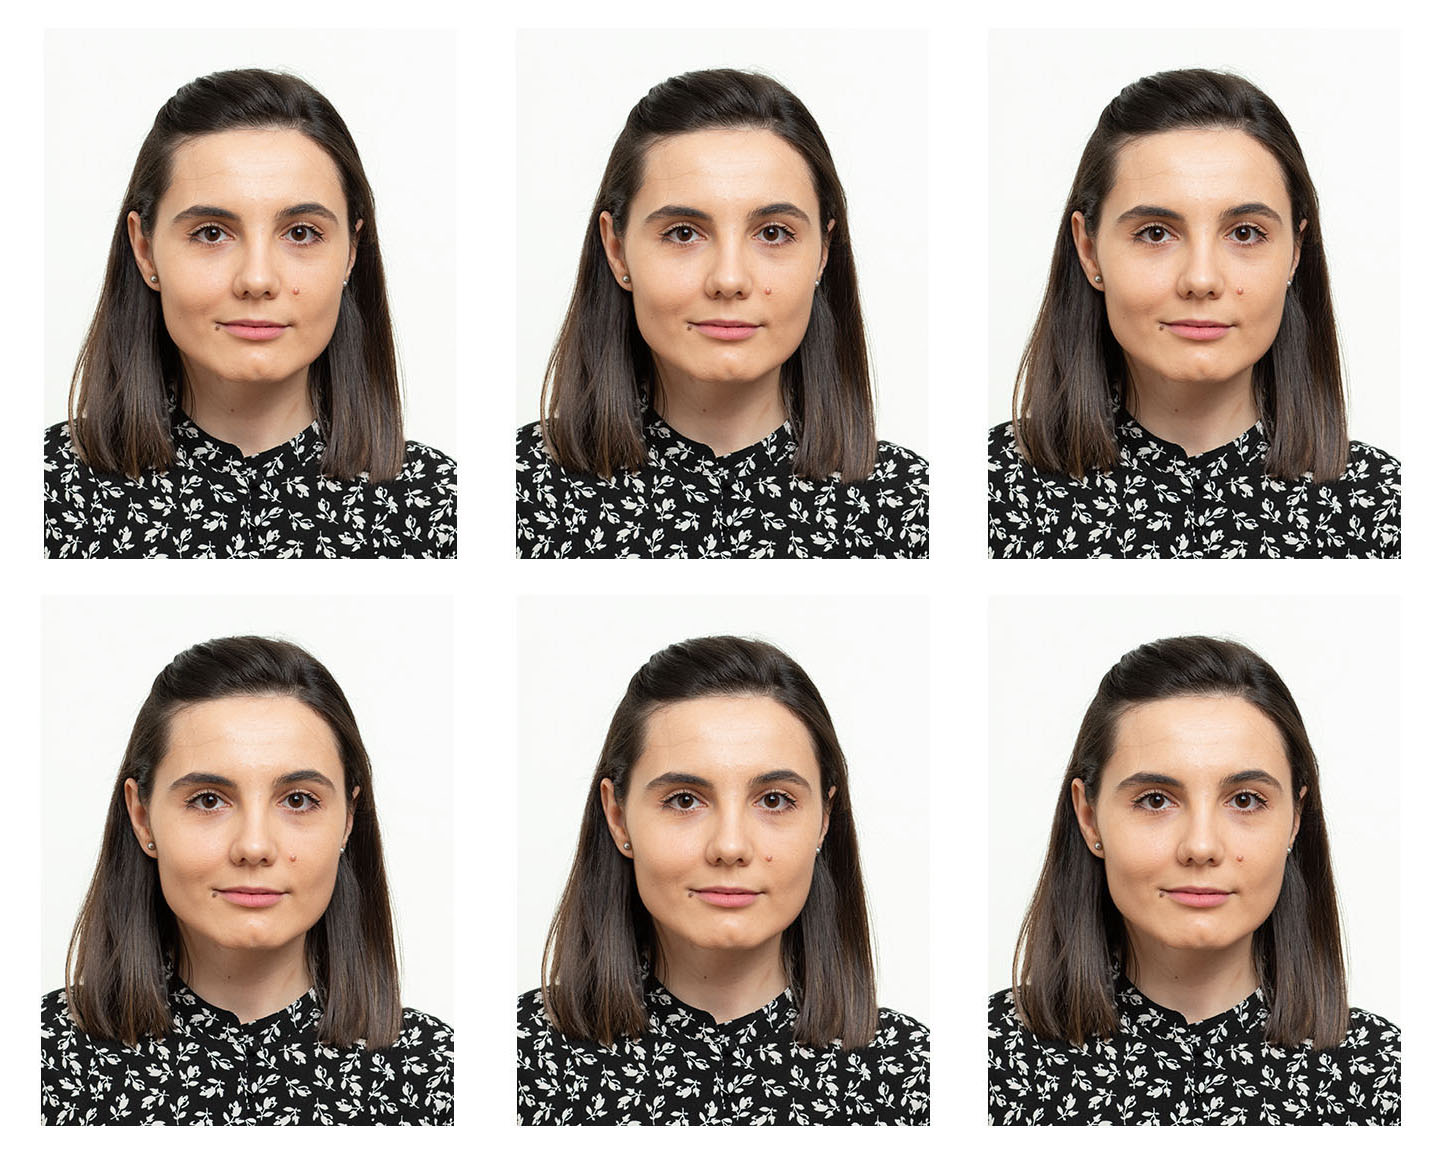 Rejected Passport and Visa Photos